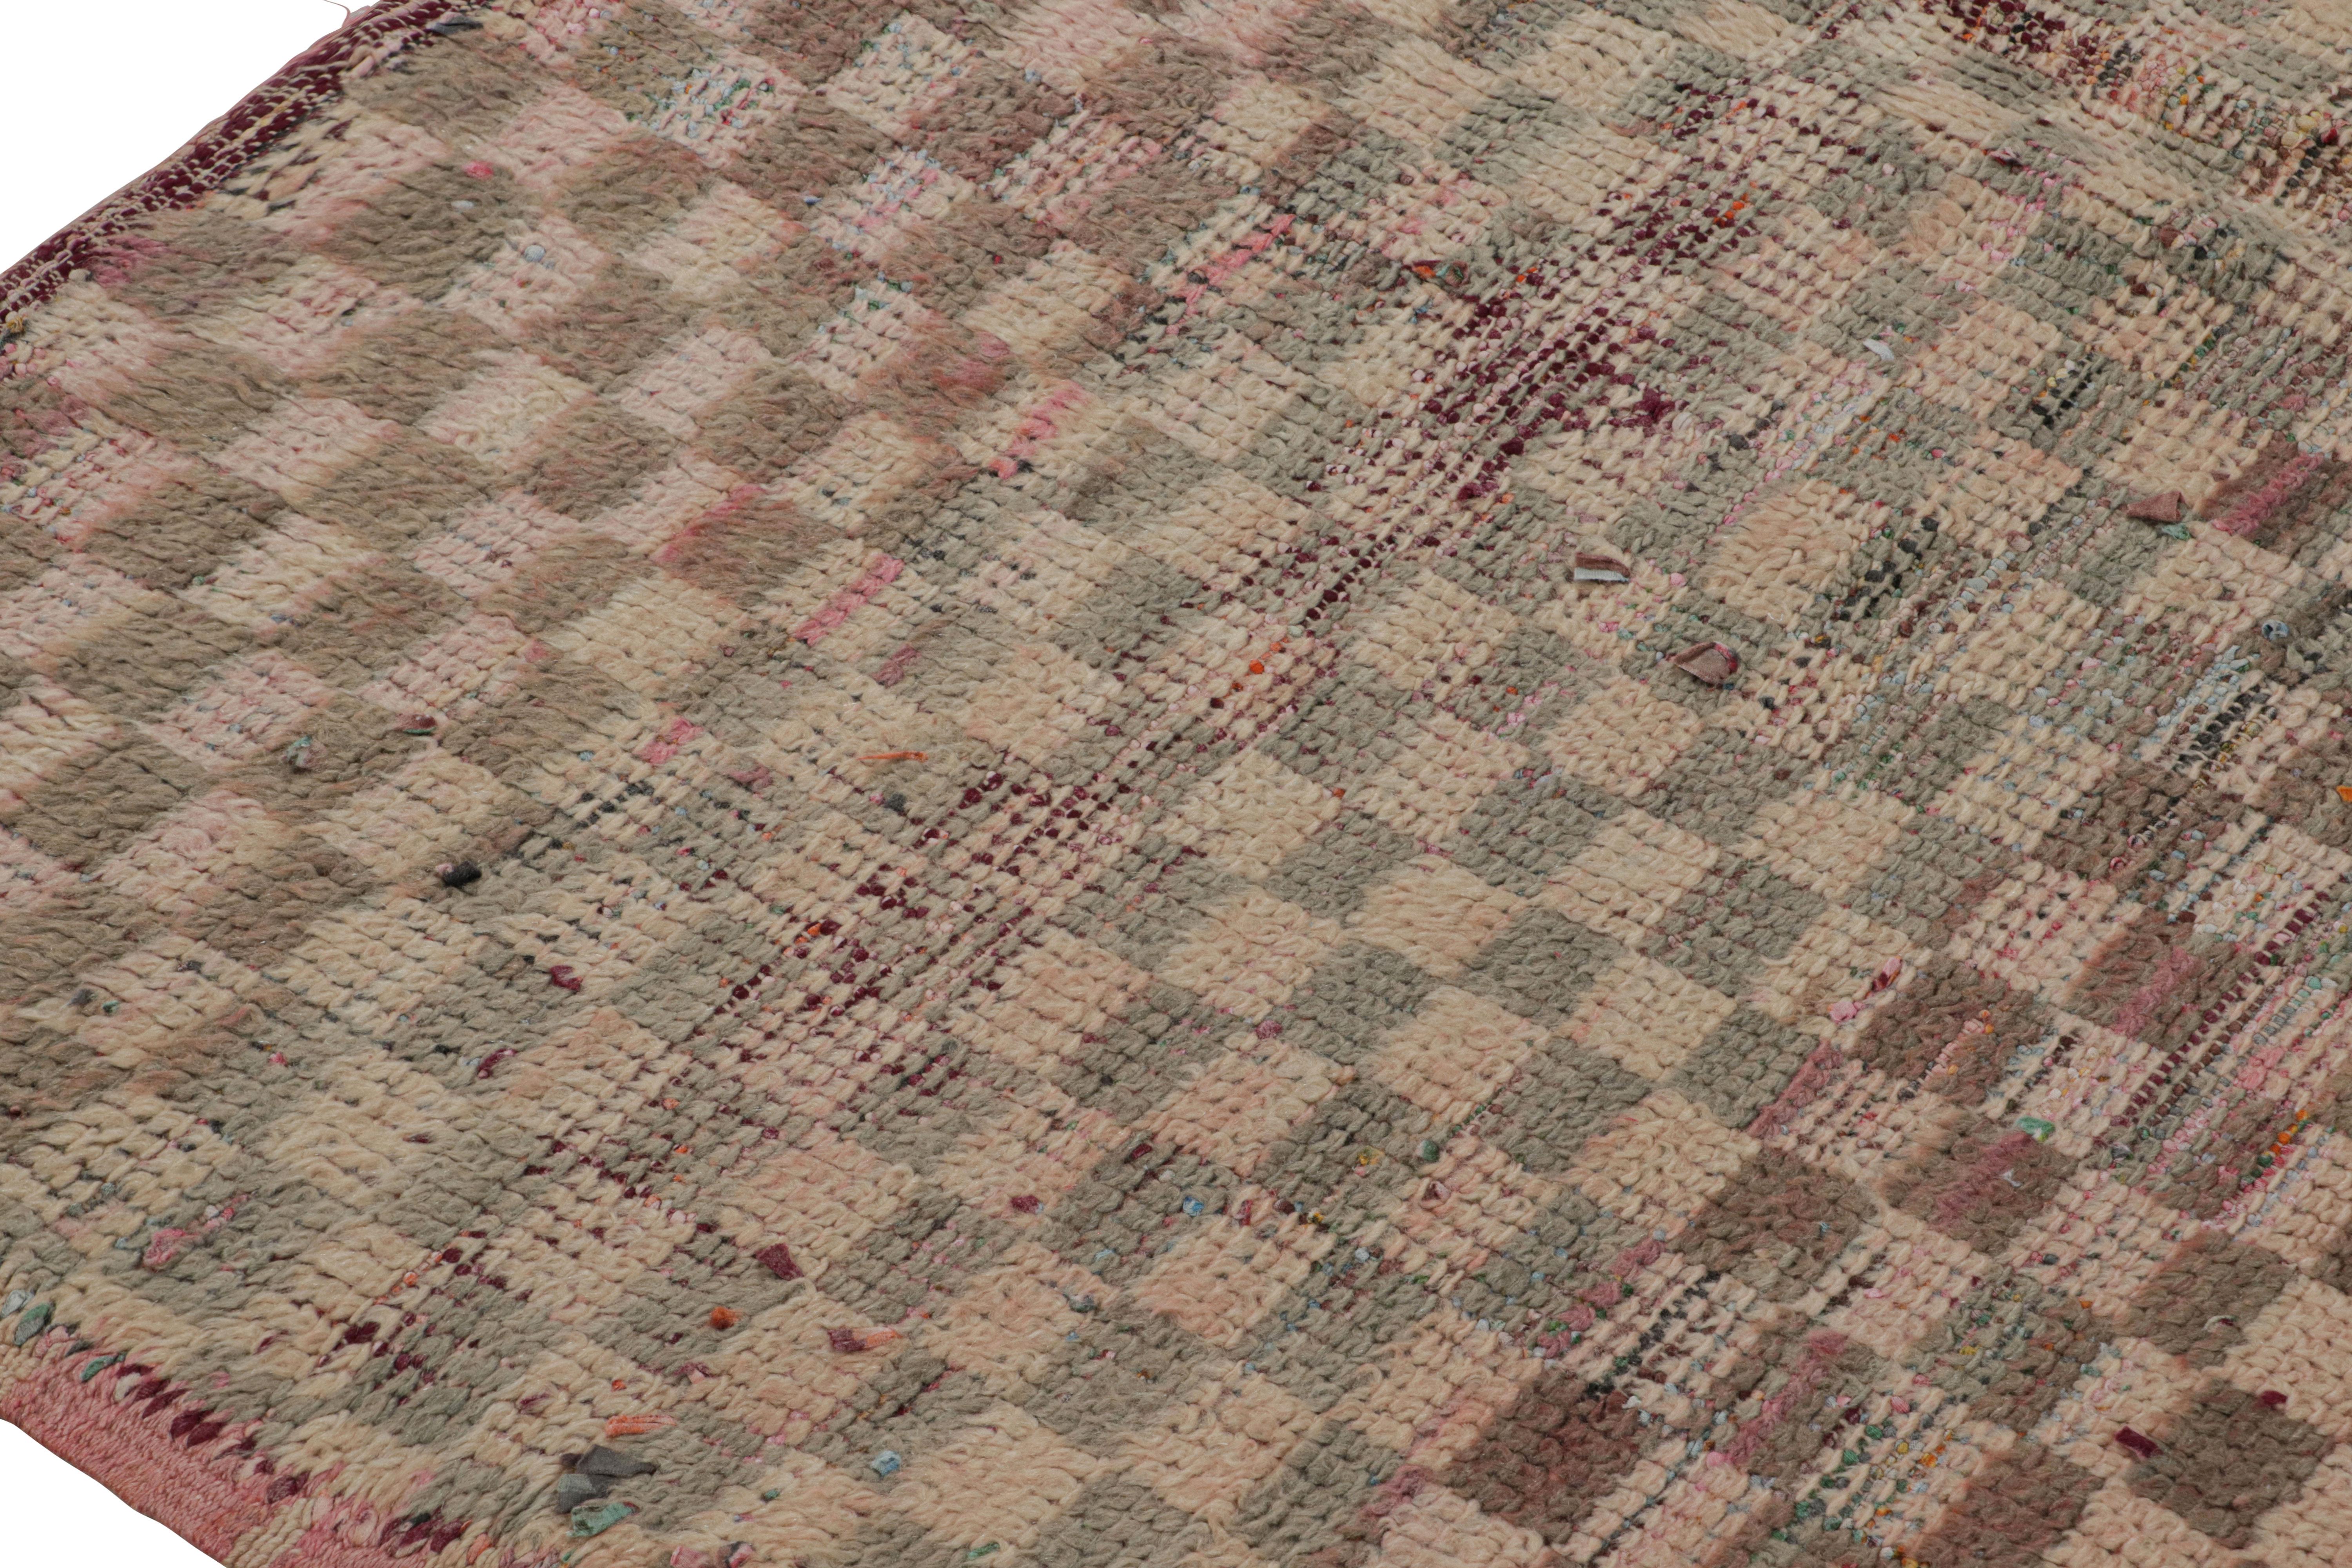 Mid-20th Century Vintage Moroccan Rug in Pink and Beige-Brown Geometric Pattern from Rug & Kilim  For Sale